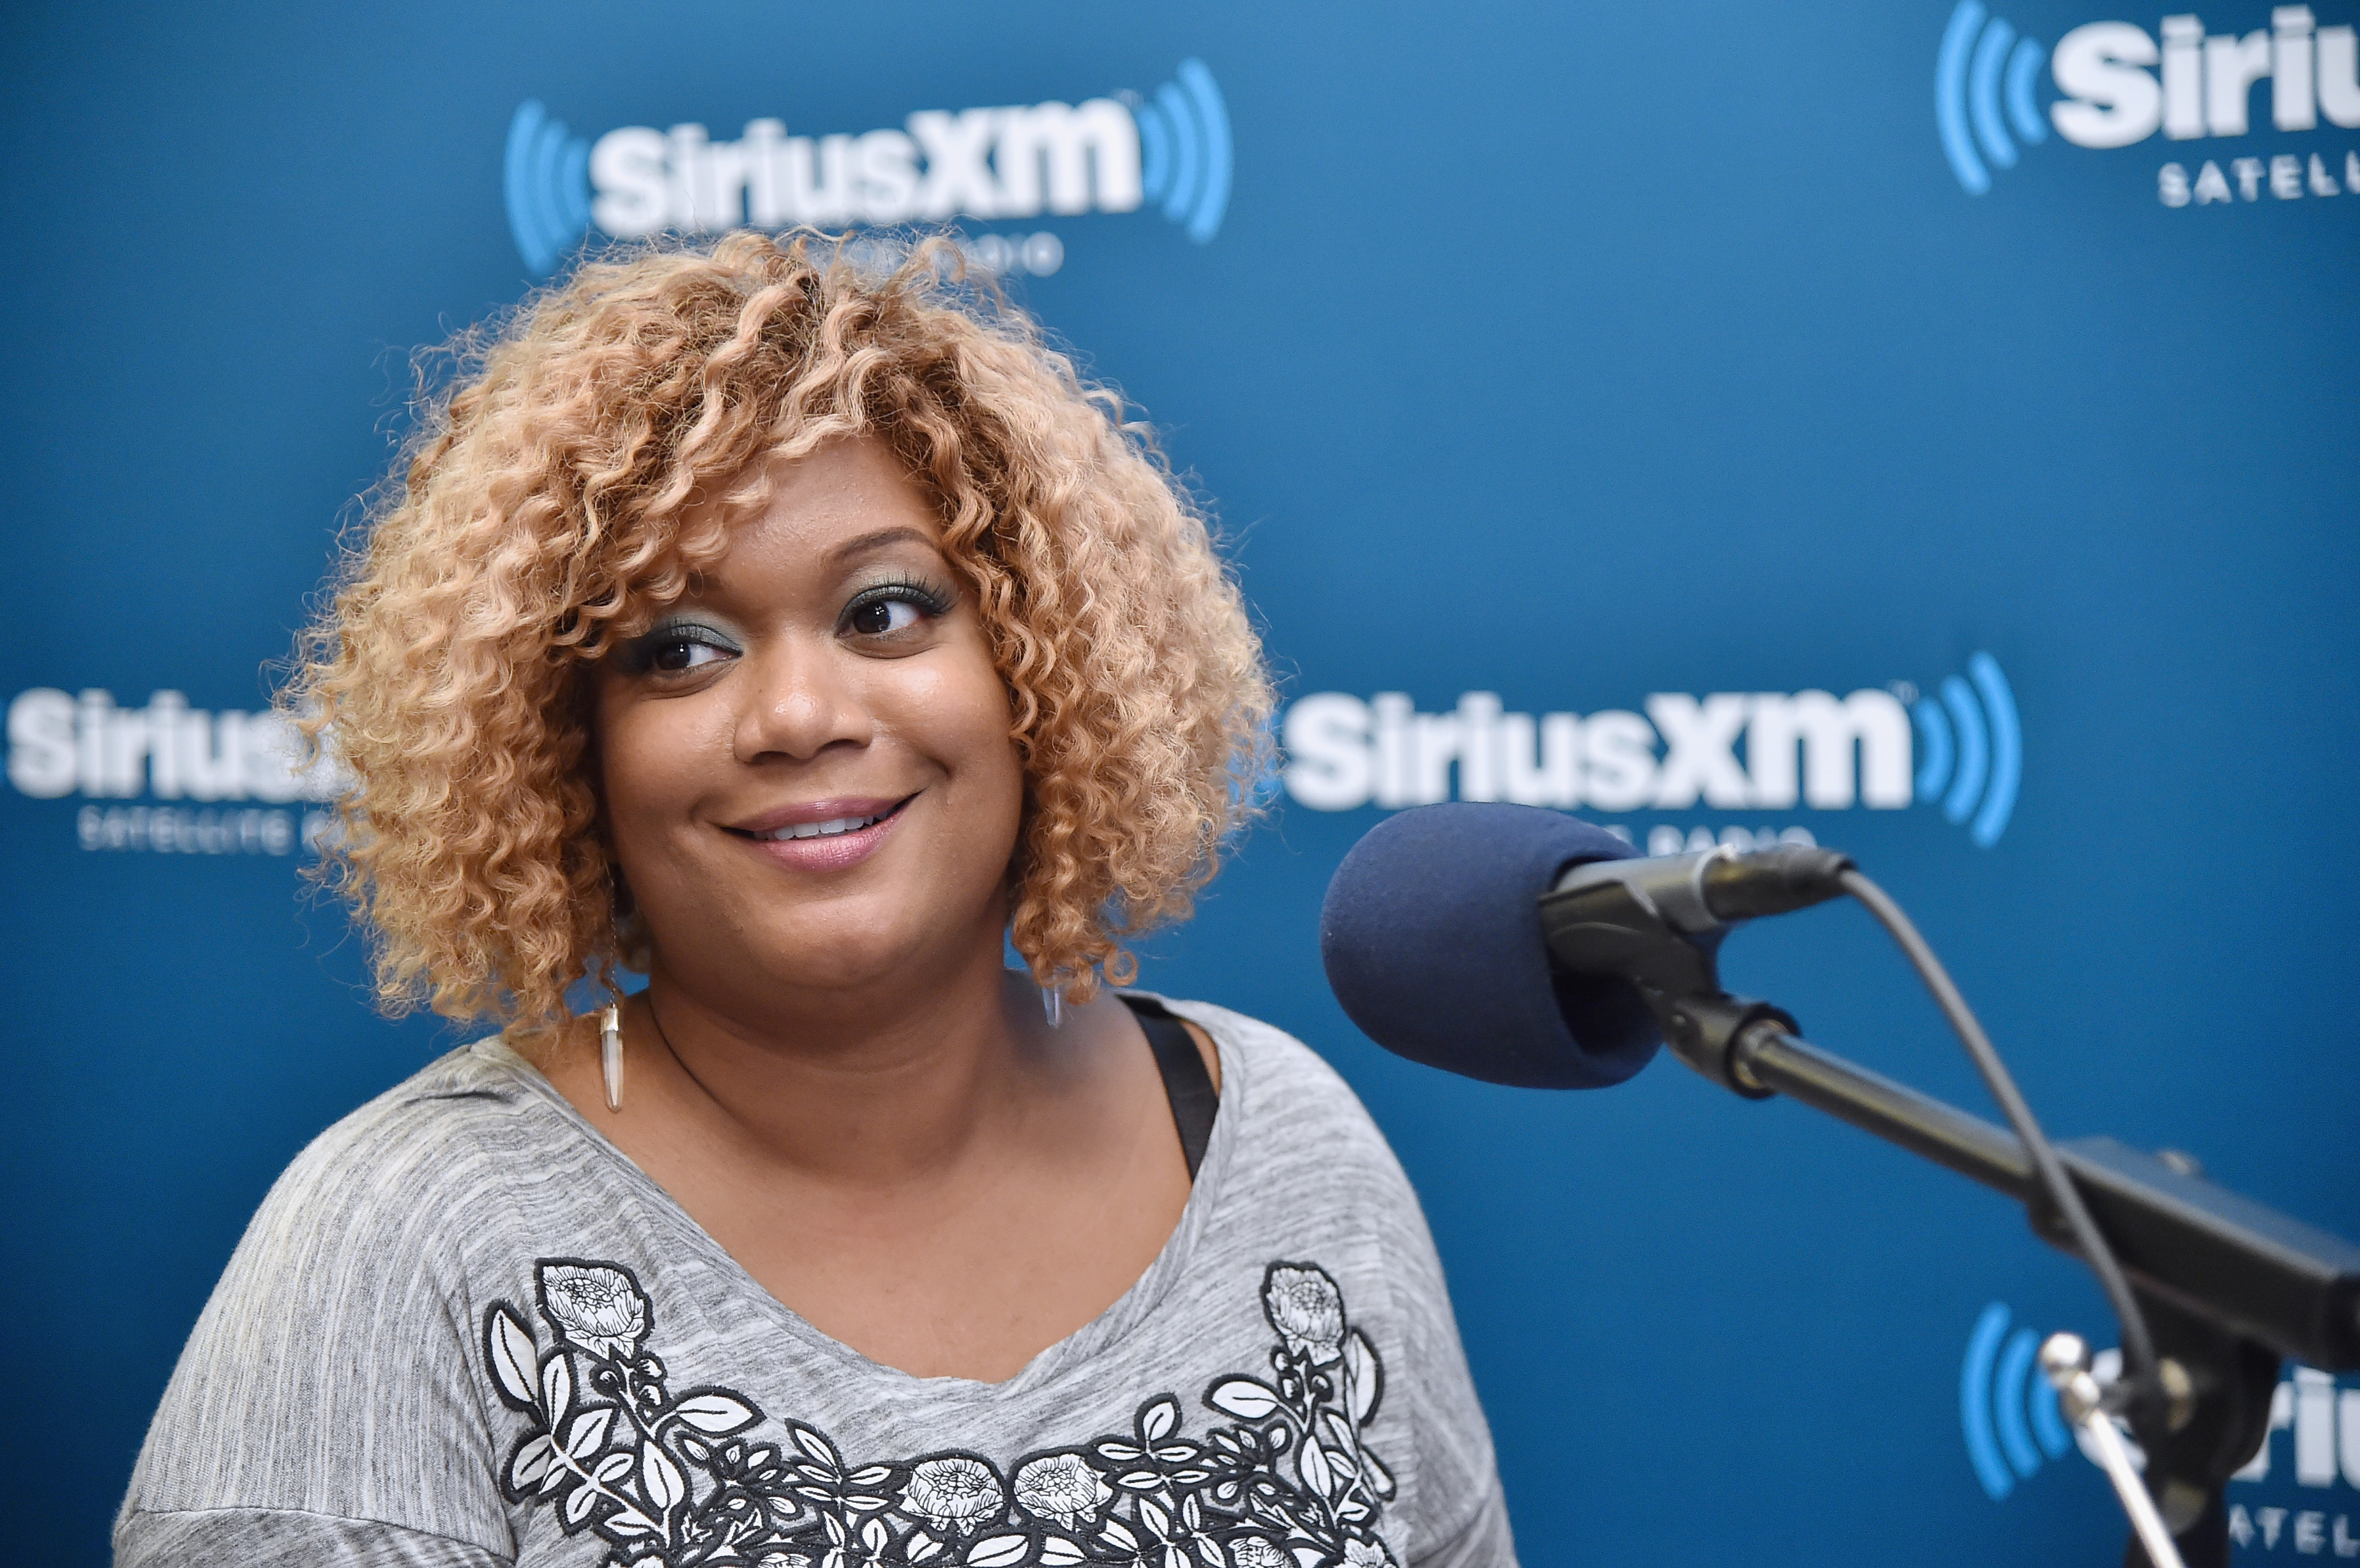 Celebrity chef Sunny Anderson wears a gray blouse in this photograph.